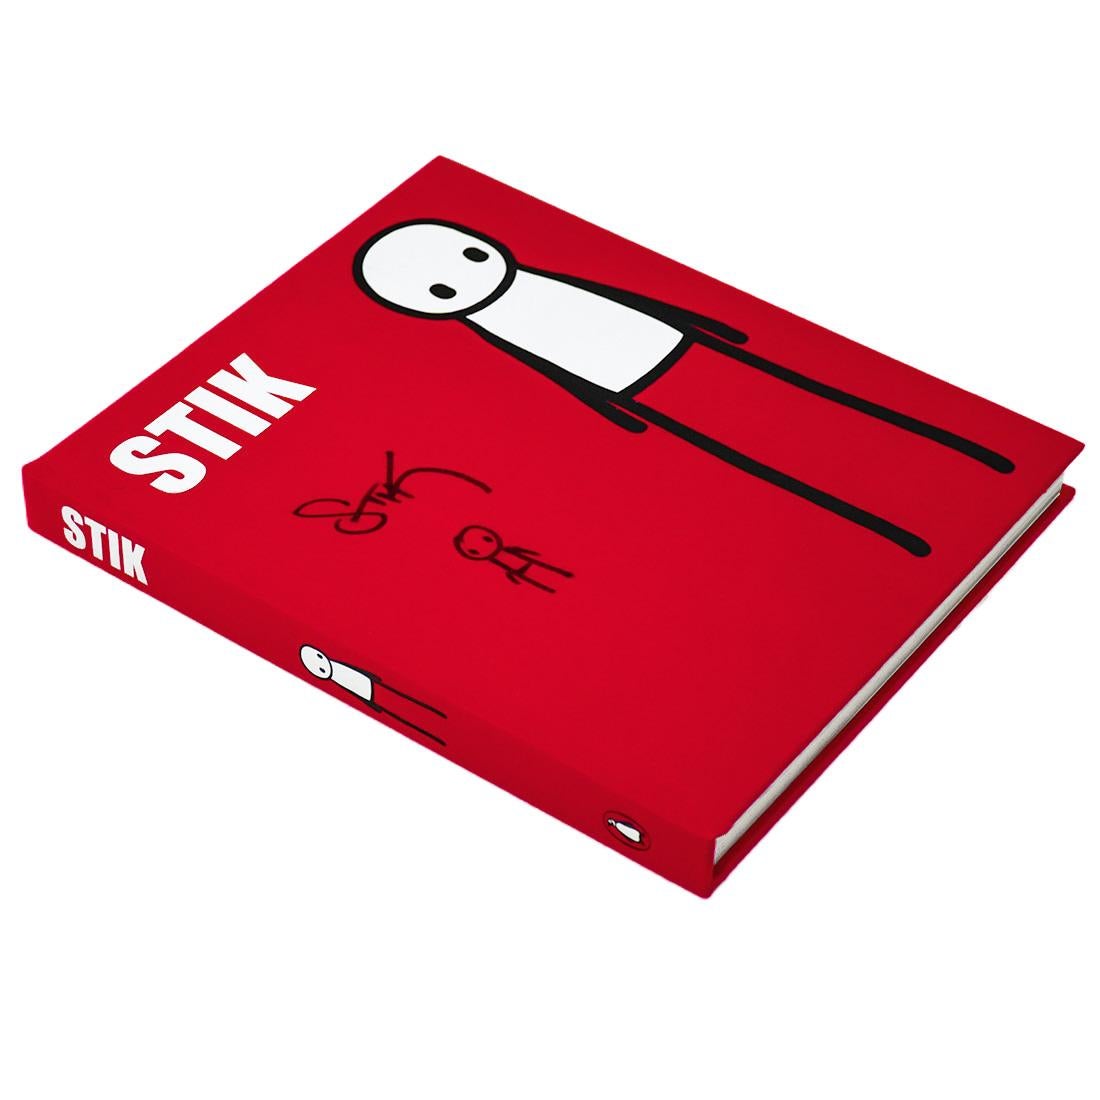 STIK Book (Hand signed with Drawing) - Contemporary Art by Stik